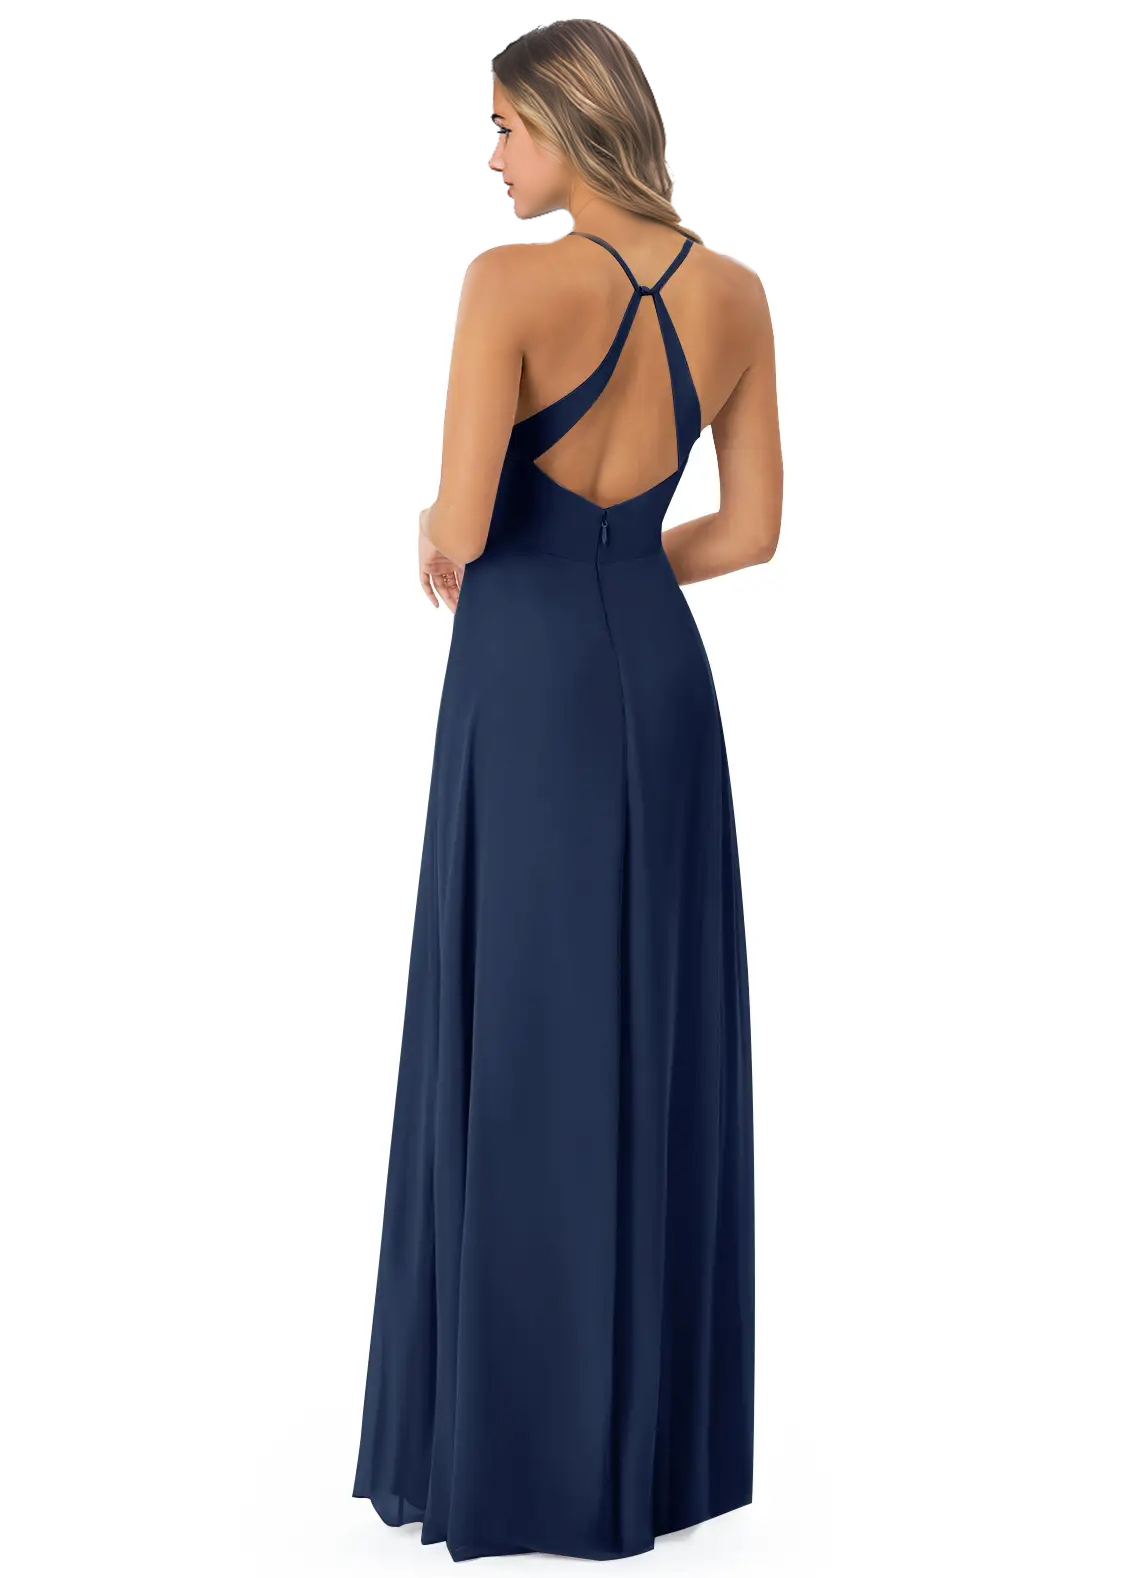 Open Back Chiffon Bridesmaid Dresses With Split Front